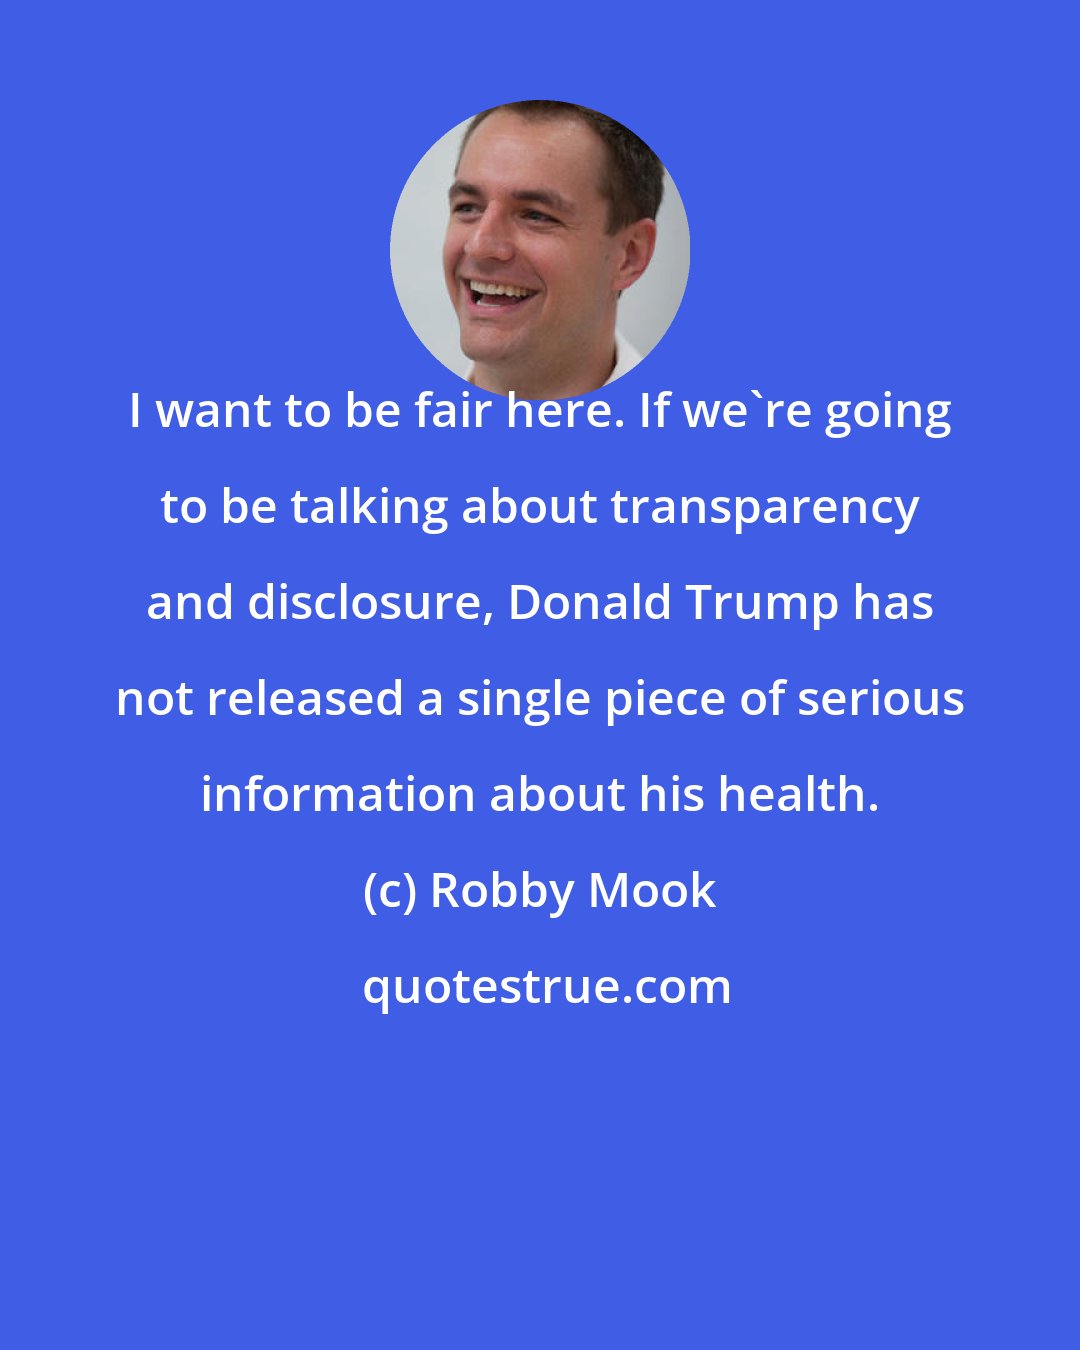 Robby Mook: I want to be fair here. If we're going to be talking about transparency and disclosure, Donald Trump has not released a single piece of serious information about his health.